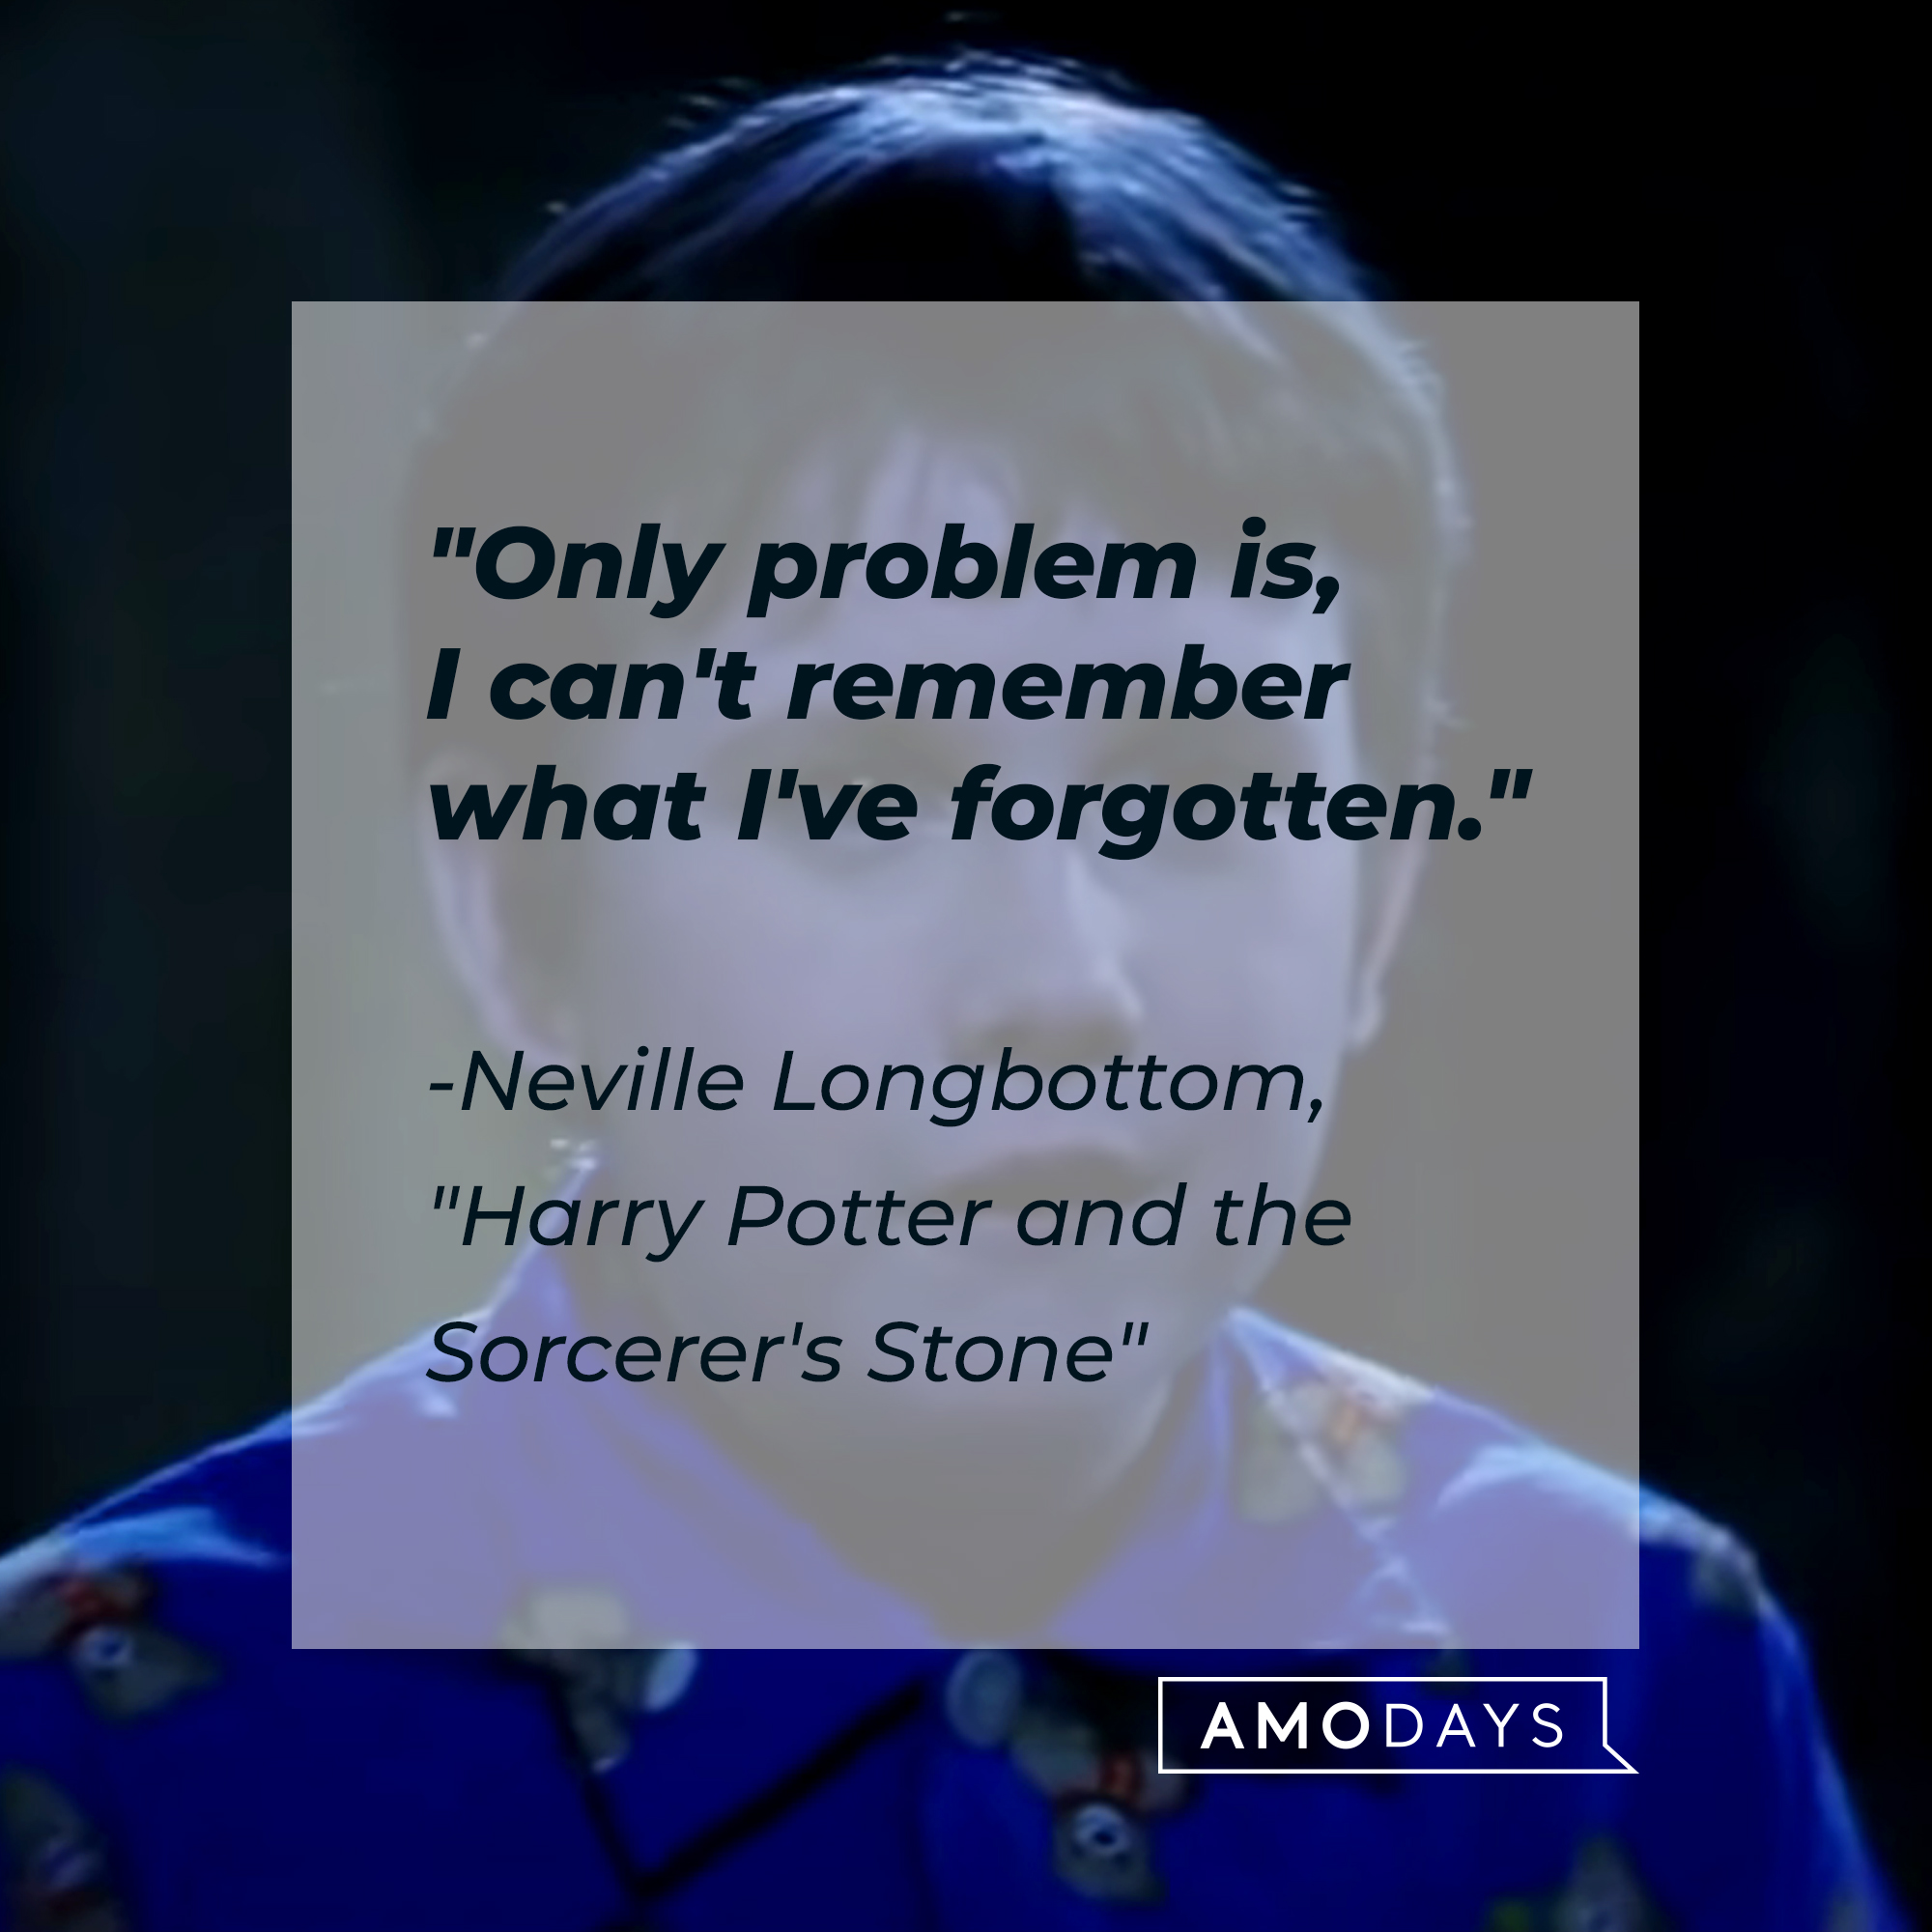 Neville Longbottom with his quote: "Only problem is, I can't remember what I've forgotten." | Source: Facebook.com/harrypotter